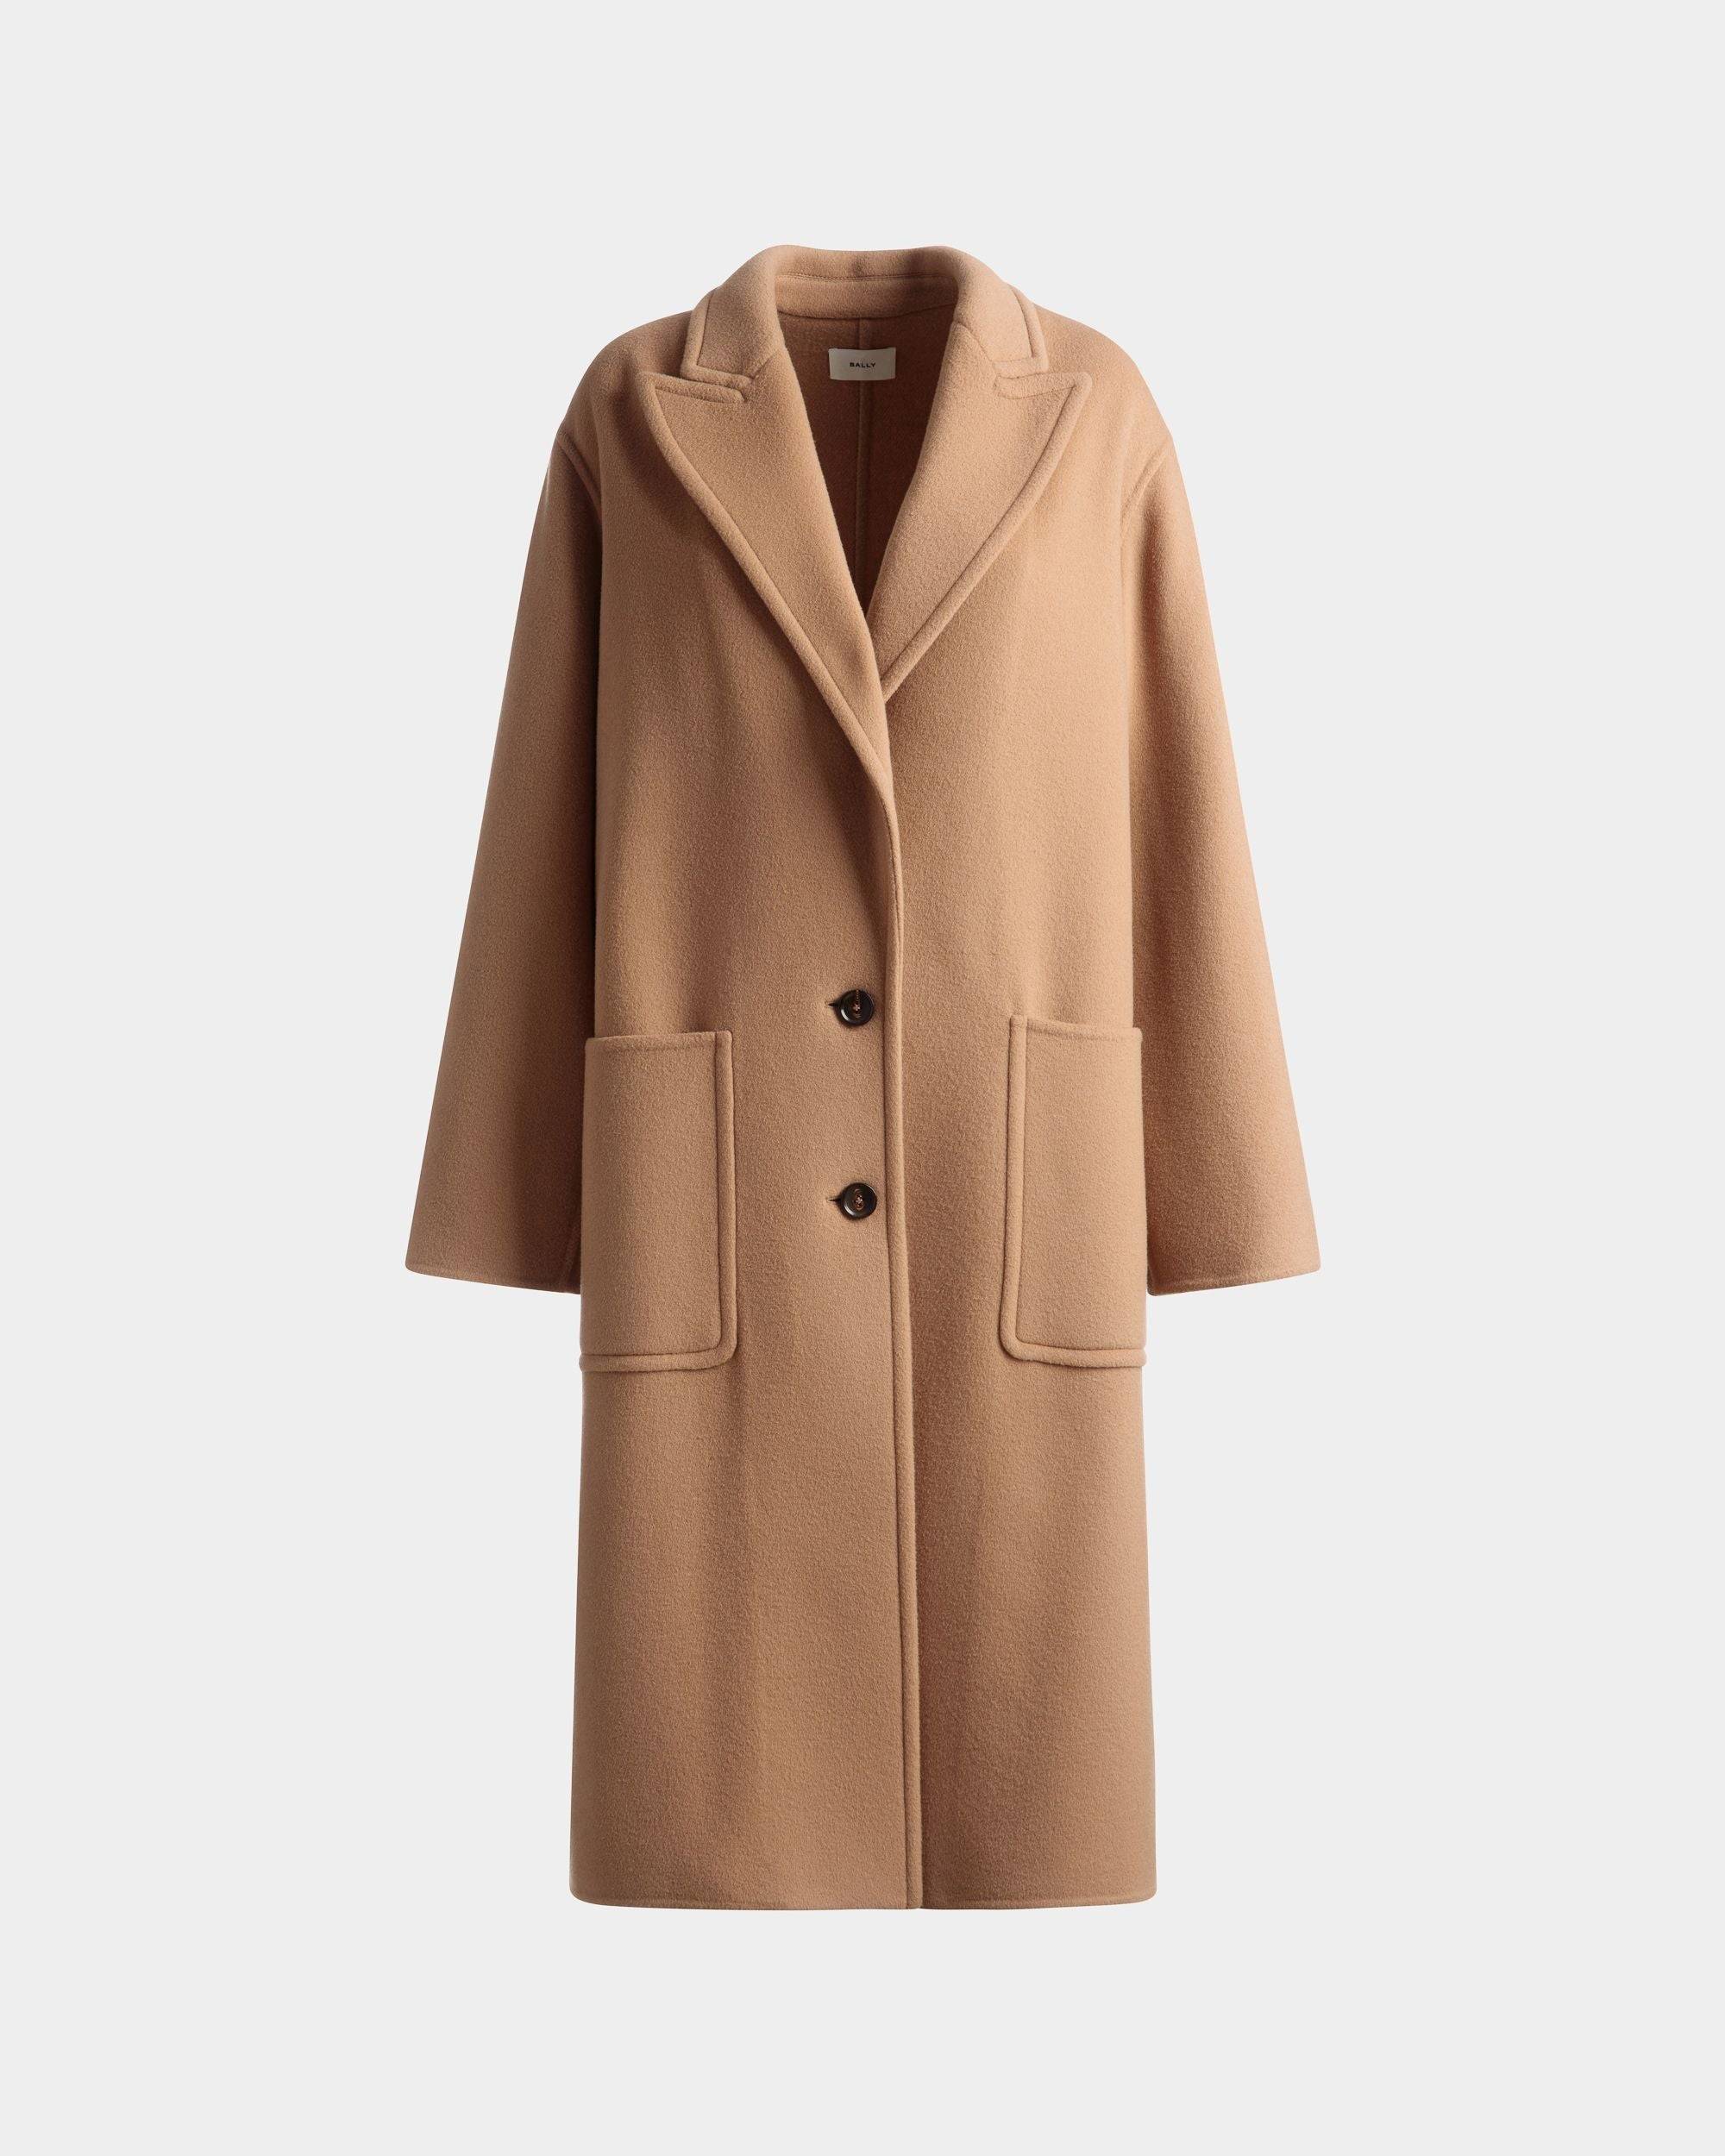 Women's Single-Breasted Coat In Camel Cashmere Wool Mix | Bally | Still Life Front